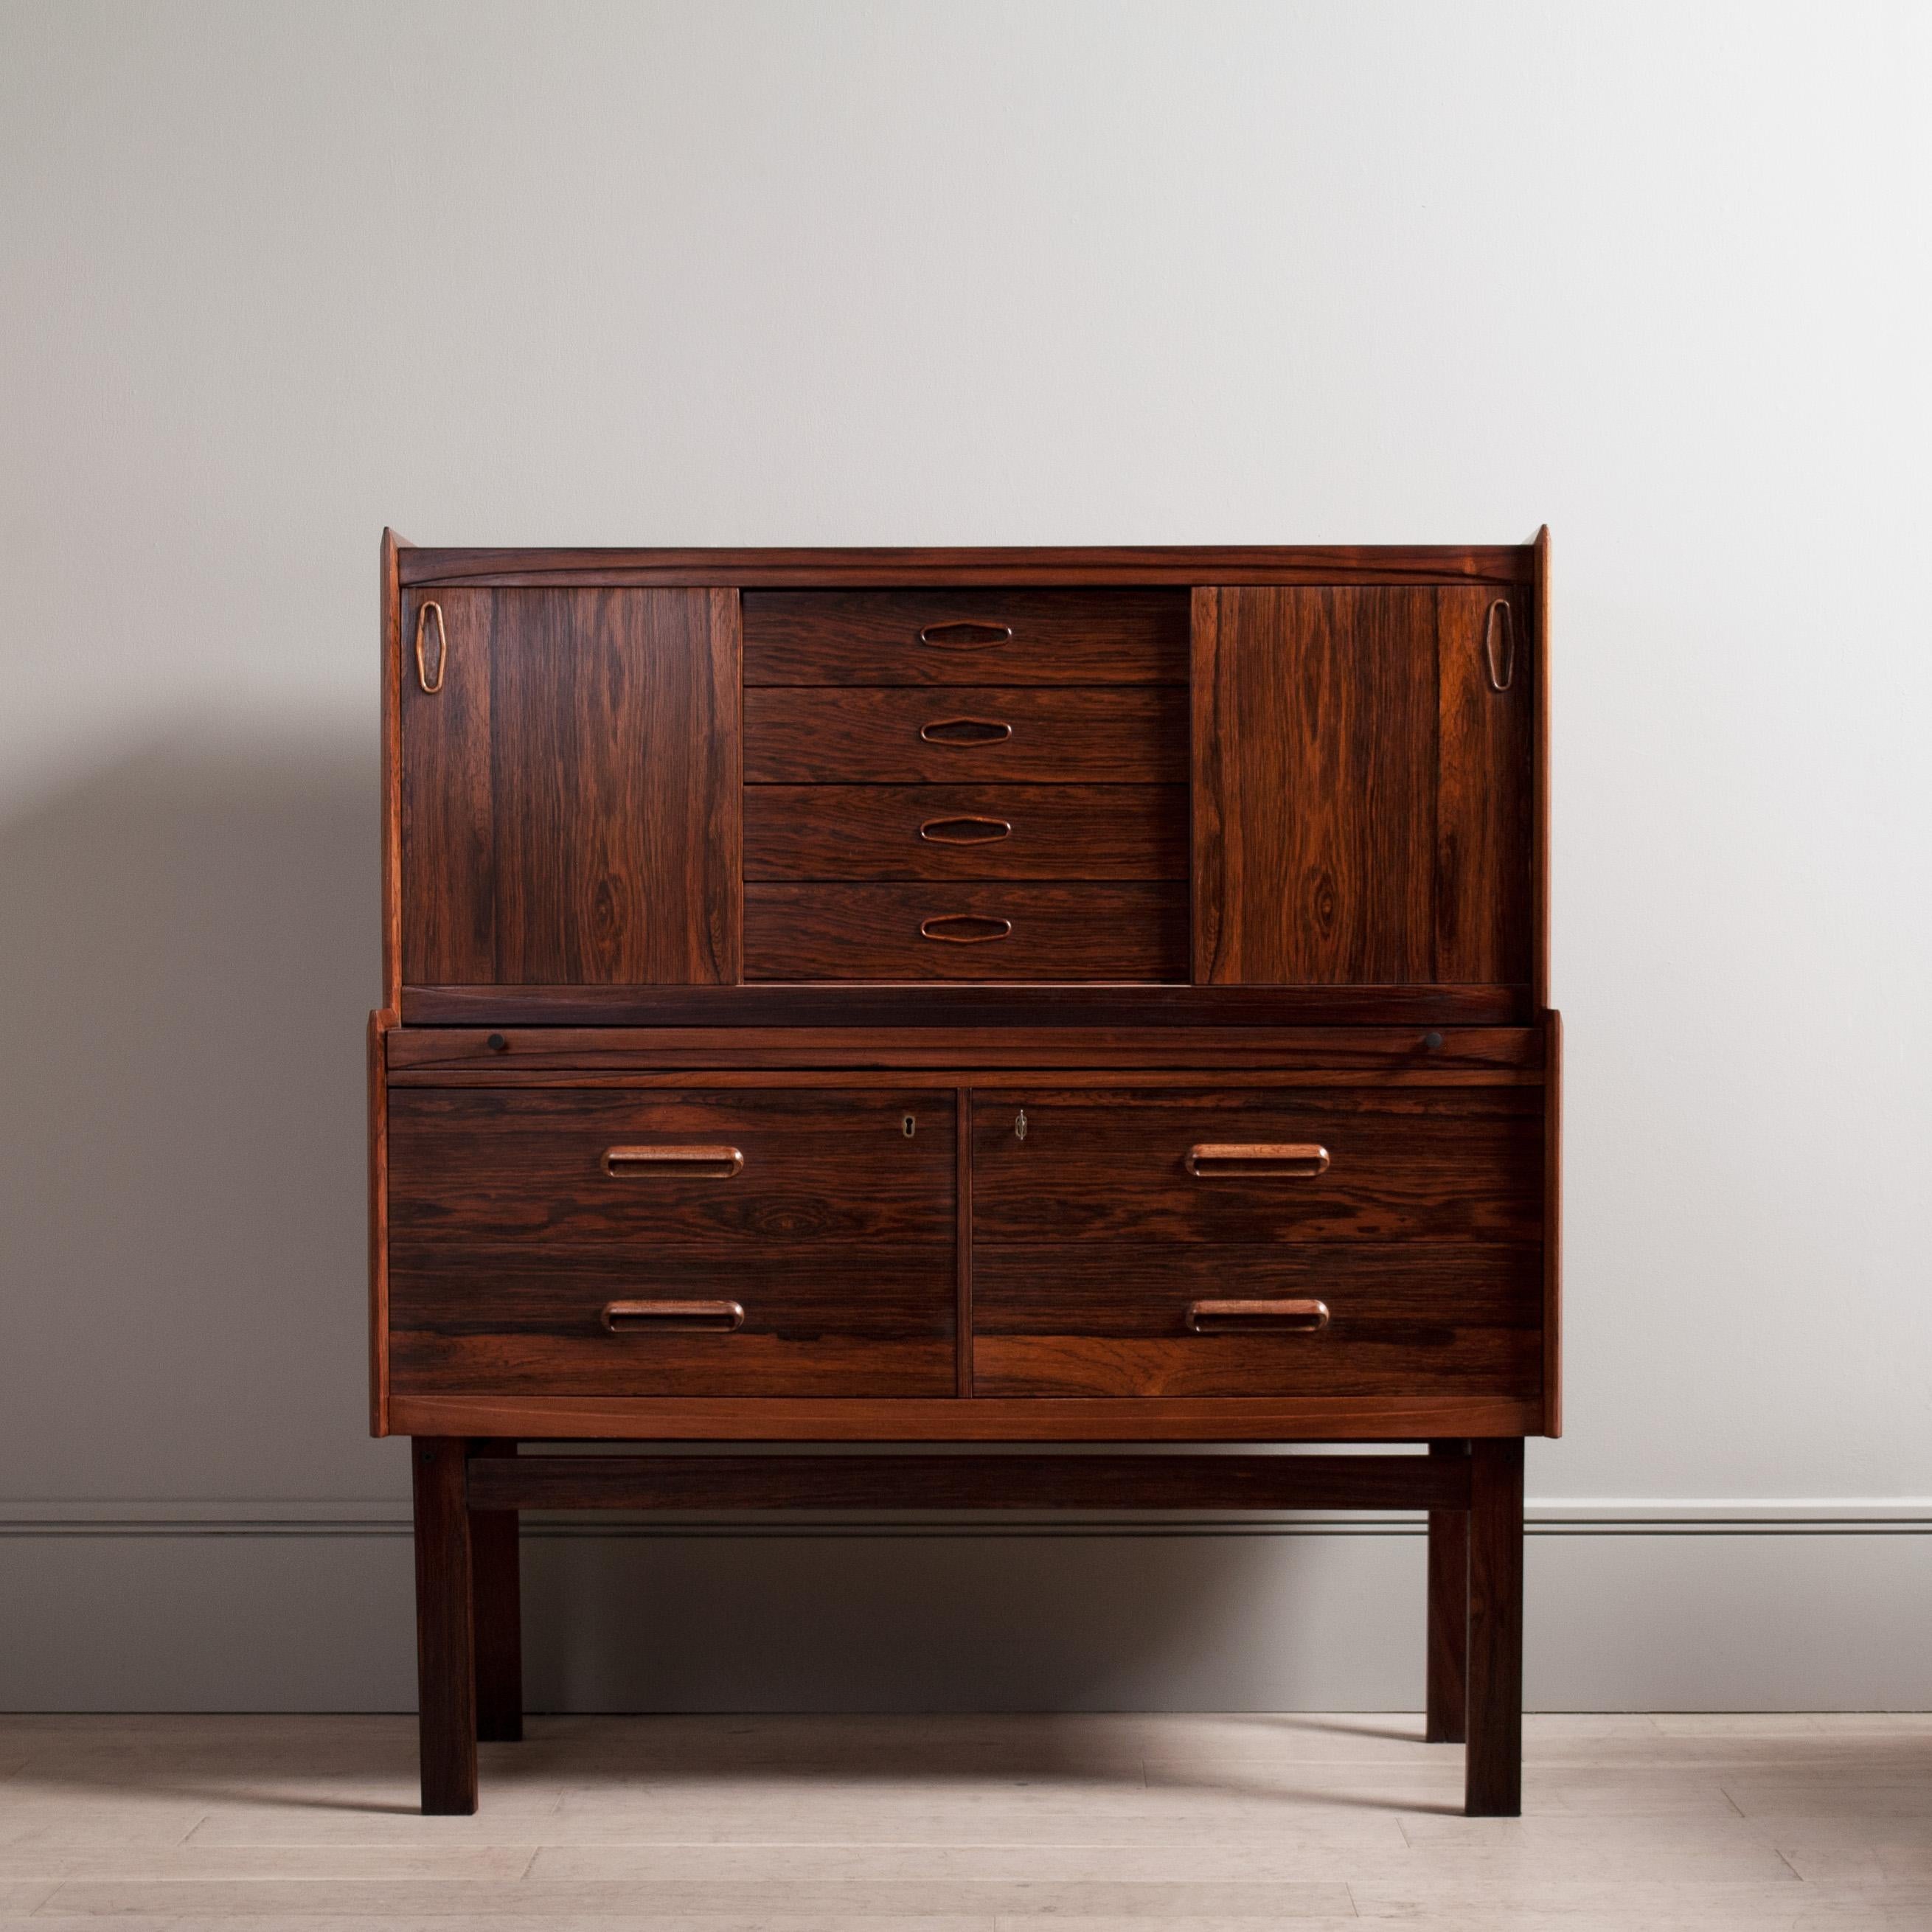 A very fine quality secretaire - bureau by little known maker Baggaardens Mobler, CH madsen, denmark circa 1960. 
Wonderful design features and highly practical. Multi storage parts and pull out work surface. 
Great design details with a minimalist